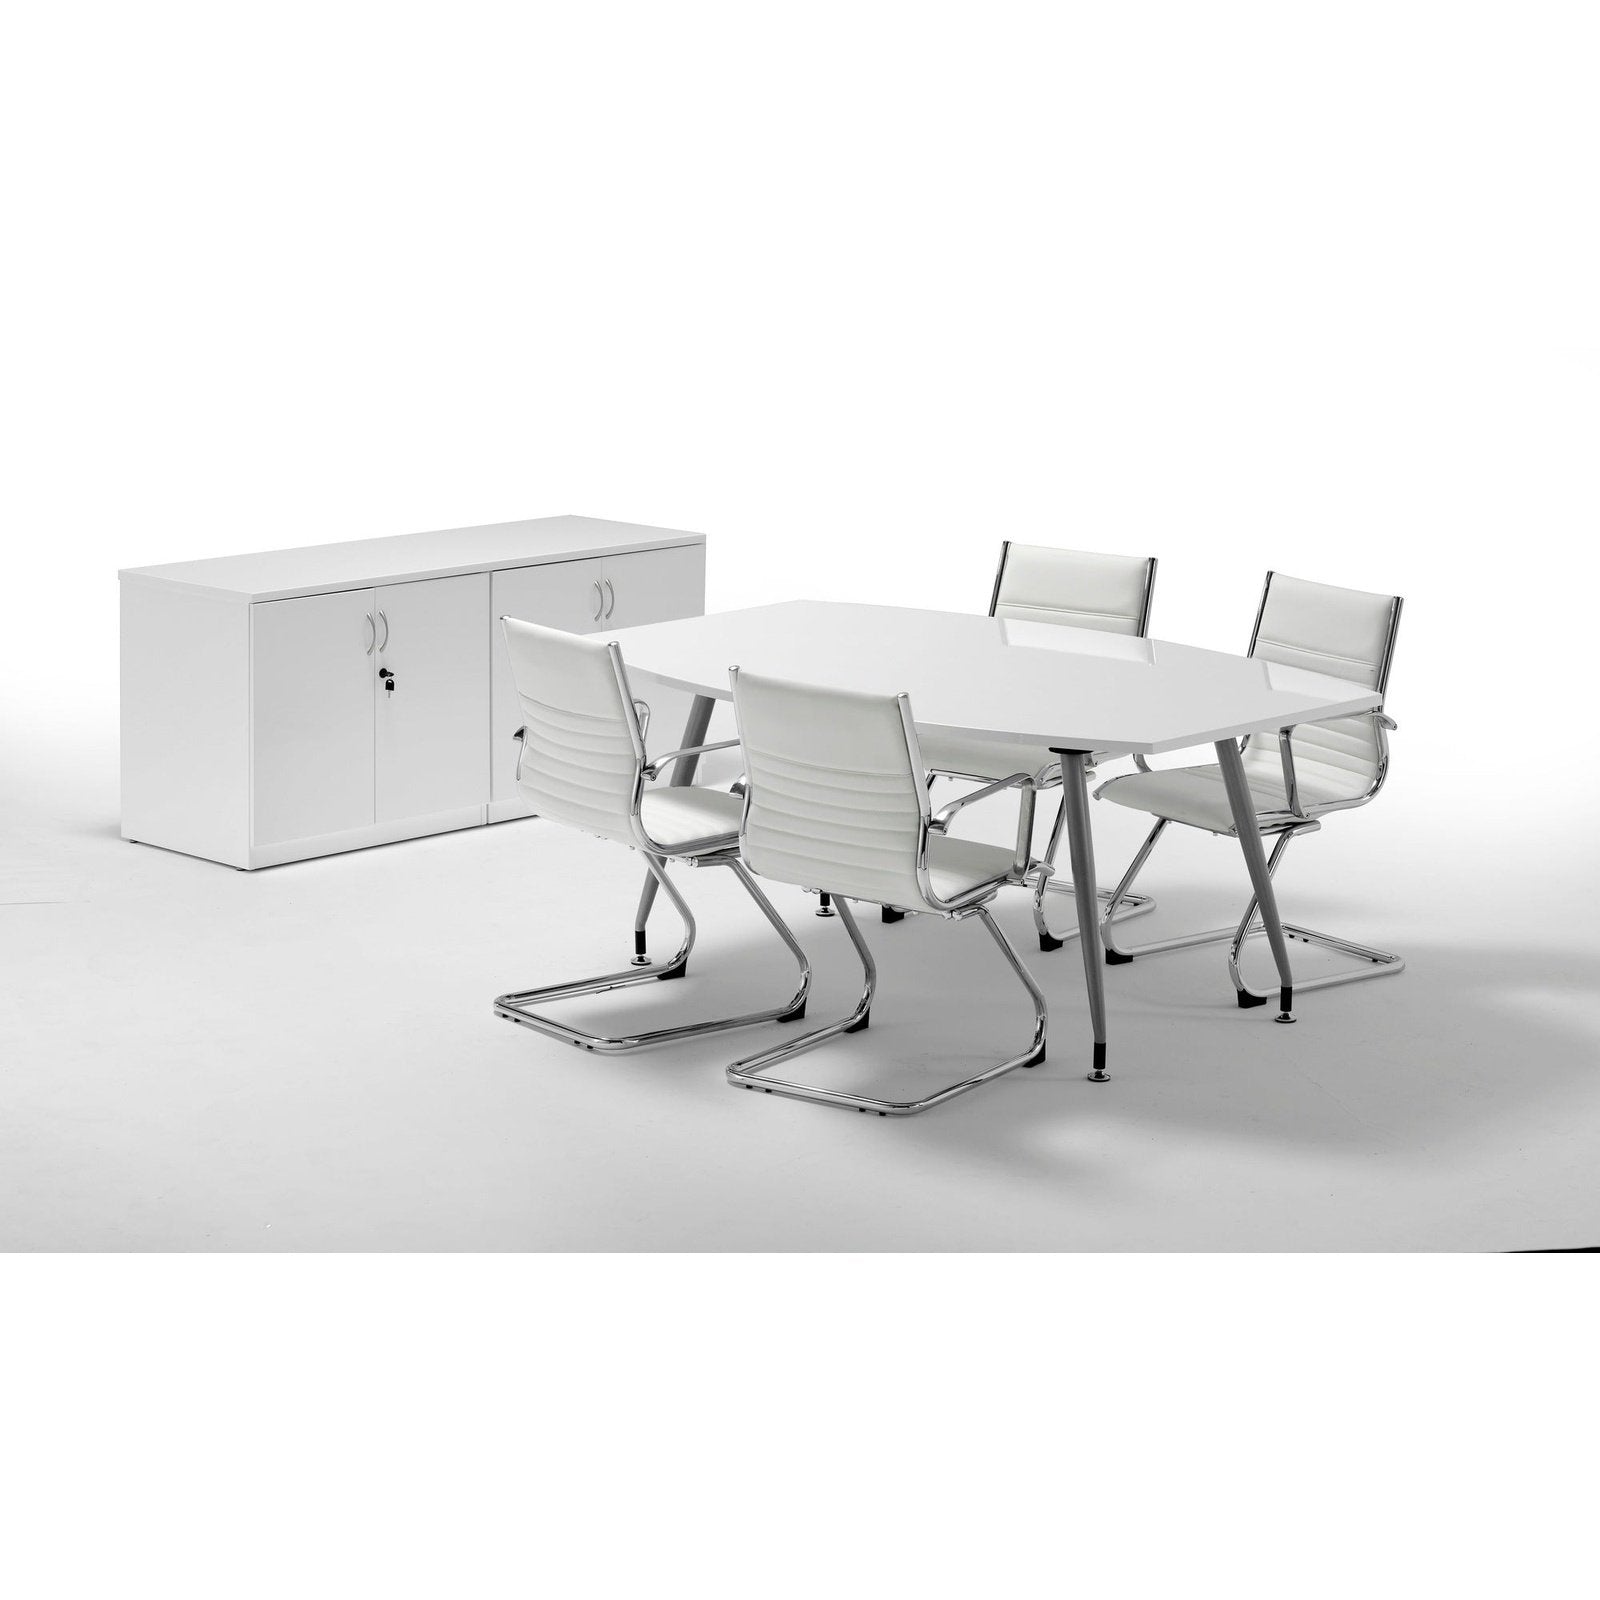 Hi-Gloss Rectangular Writable Boardroom Table - Self-Assembly, MFC Material, Silver Post Legs, 1800x1200 or 2400x1200, 5-Year Guarantee